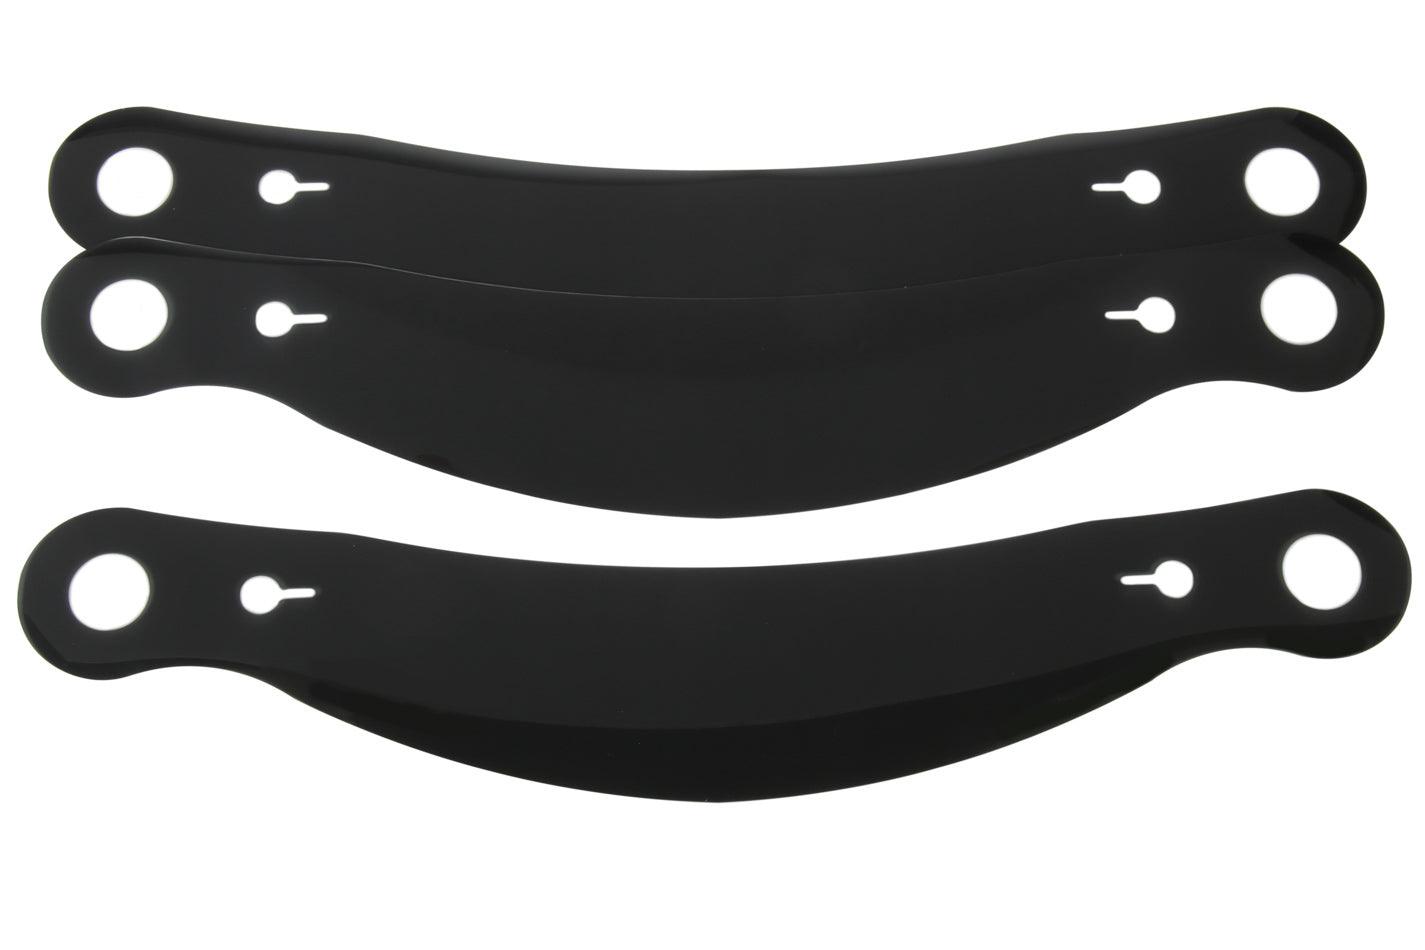 Tearoff Smoked Bell/ SE03 And SE05 Shields - Burlile Performance Products